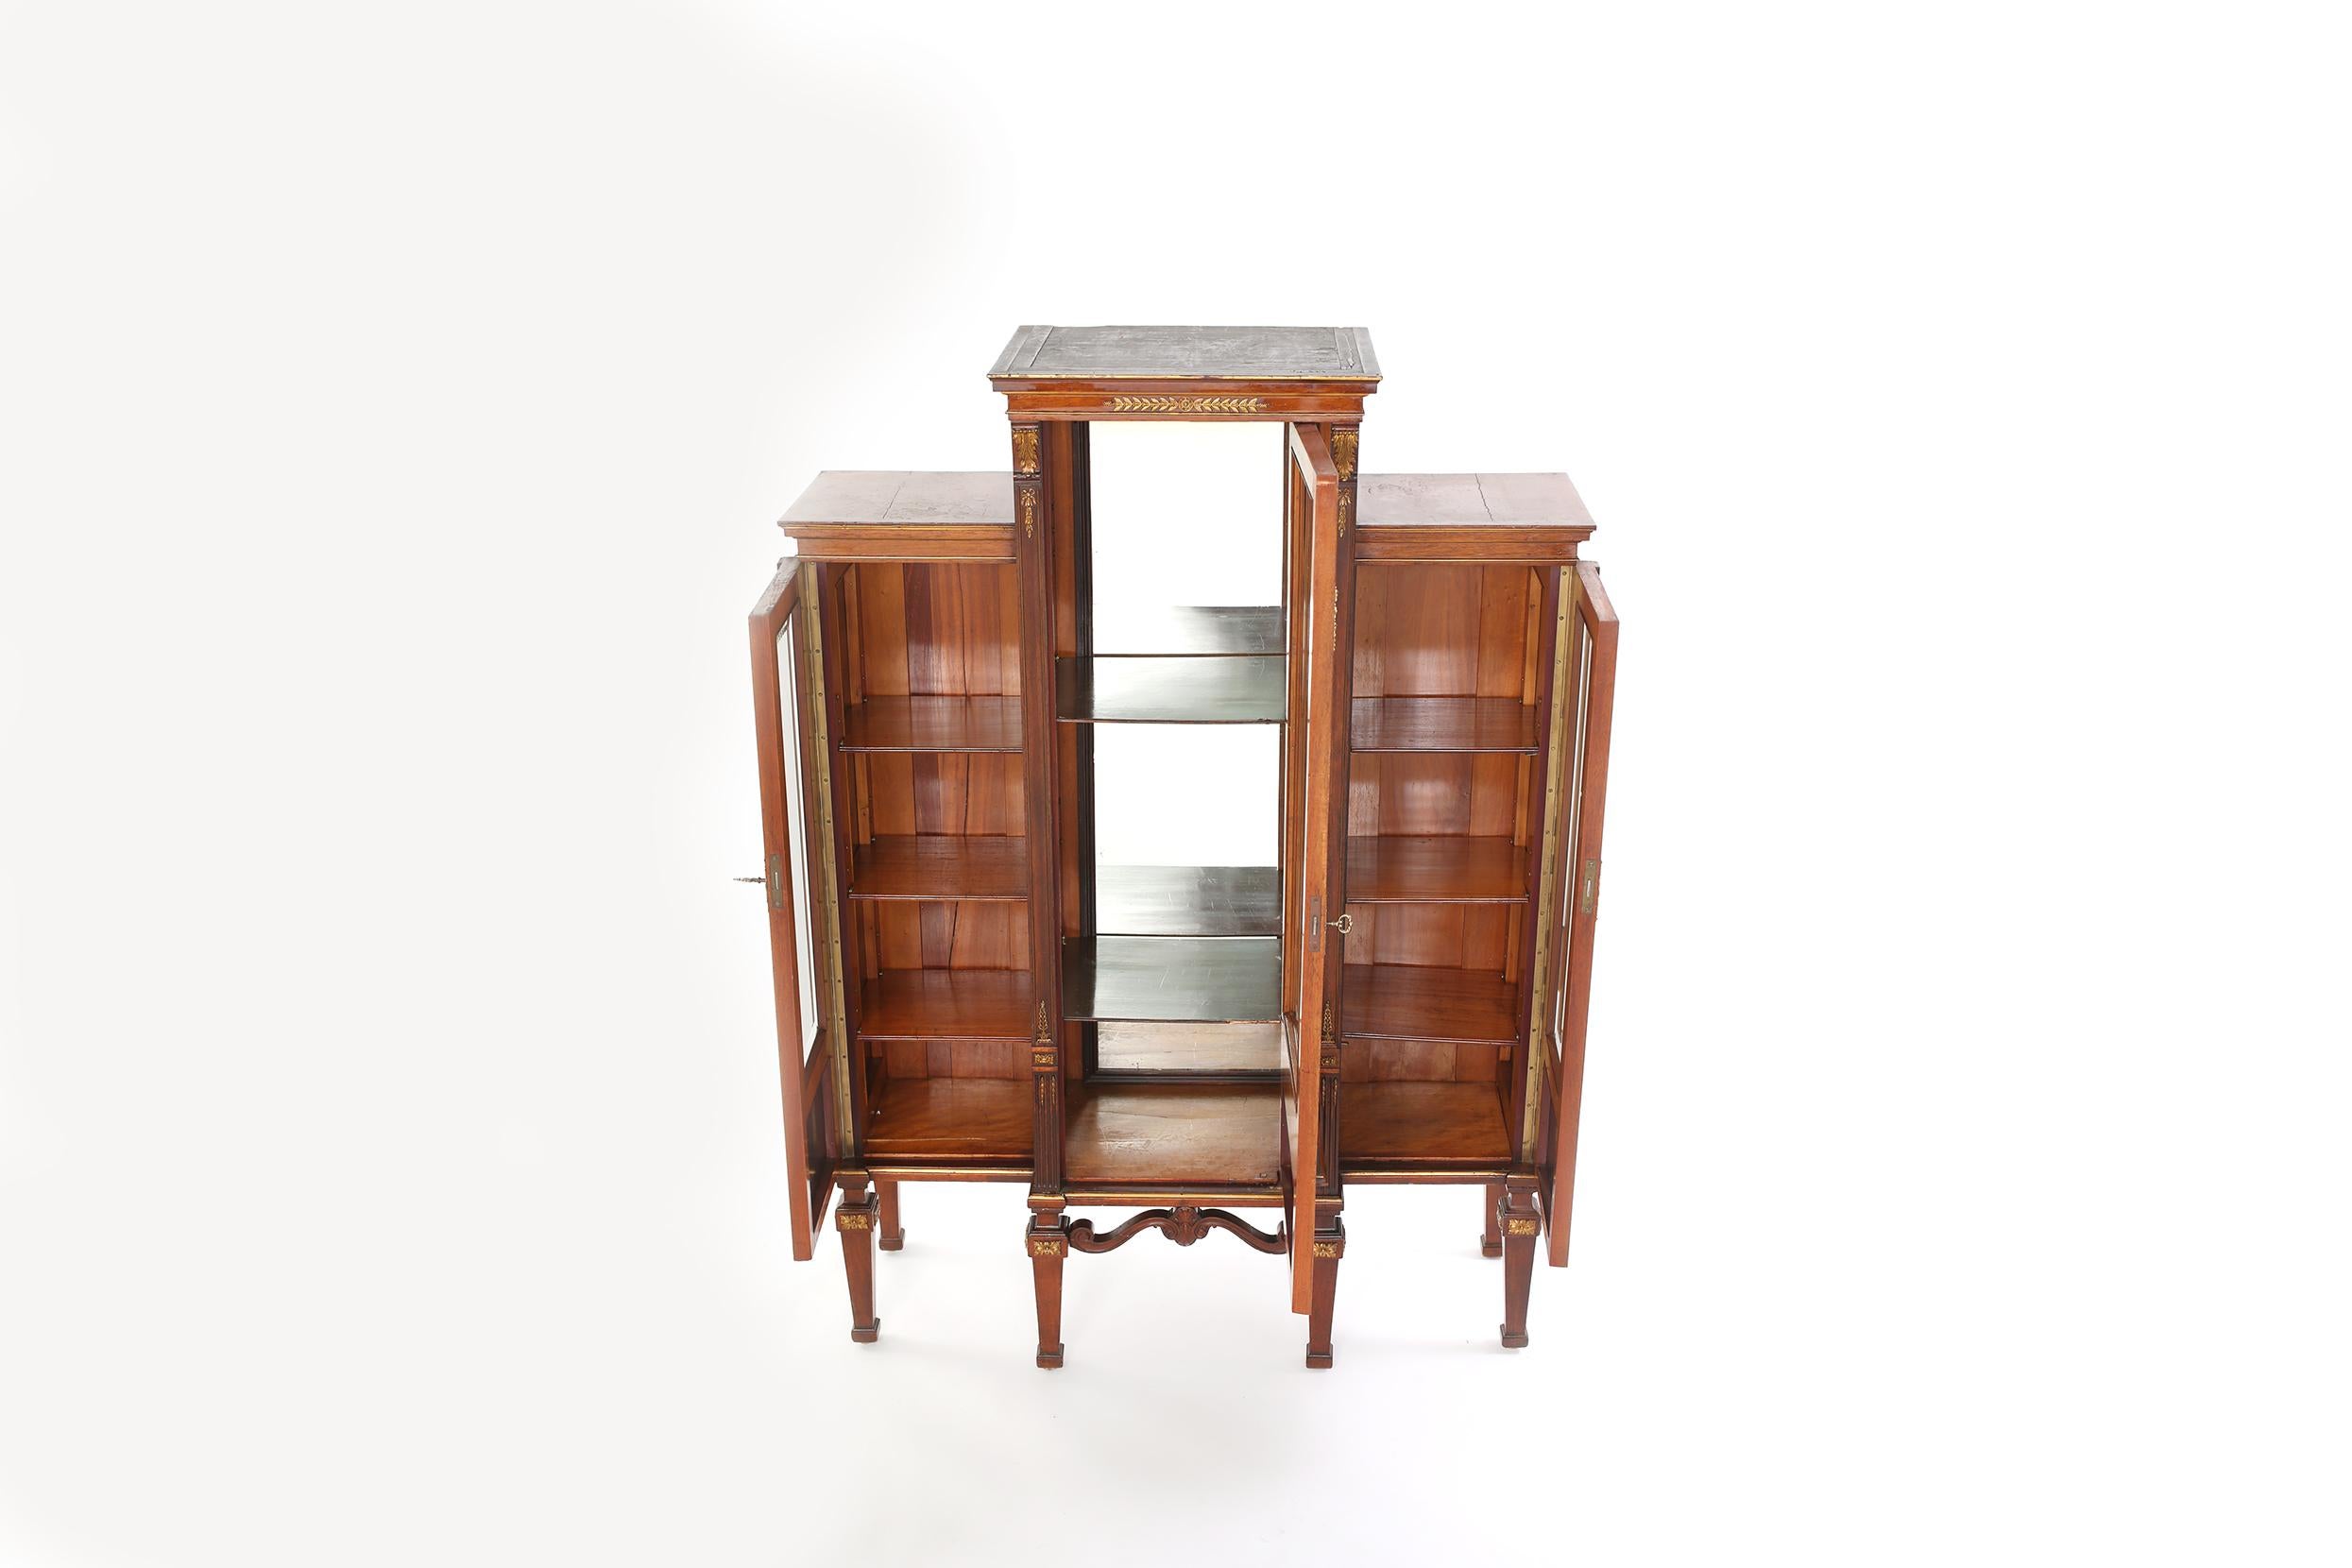 Early 19th century mahogany wood three part French display china cabinet with interior mirrored details. The display cabinet is in good antique condition with age / use appropriate wear. The piece stand about 63 inches high x 43.5 inches wide x 17